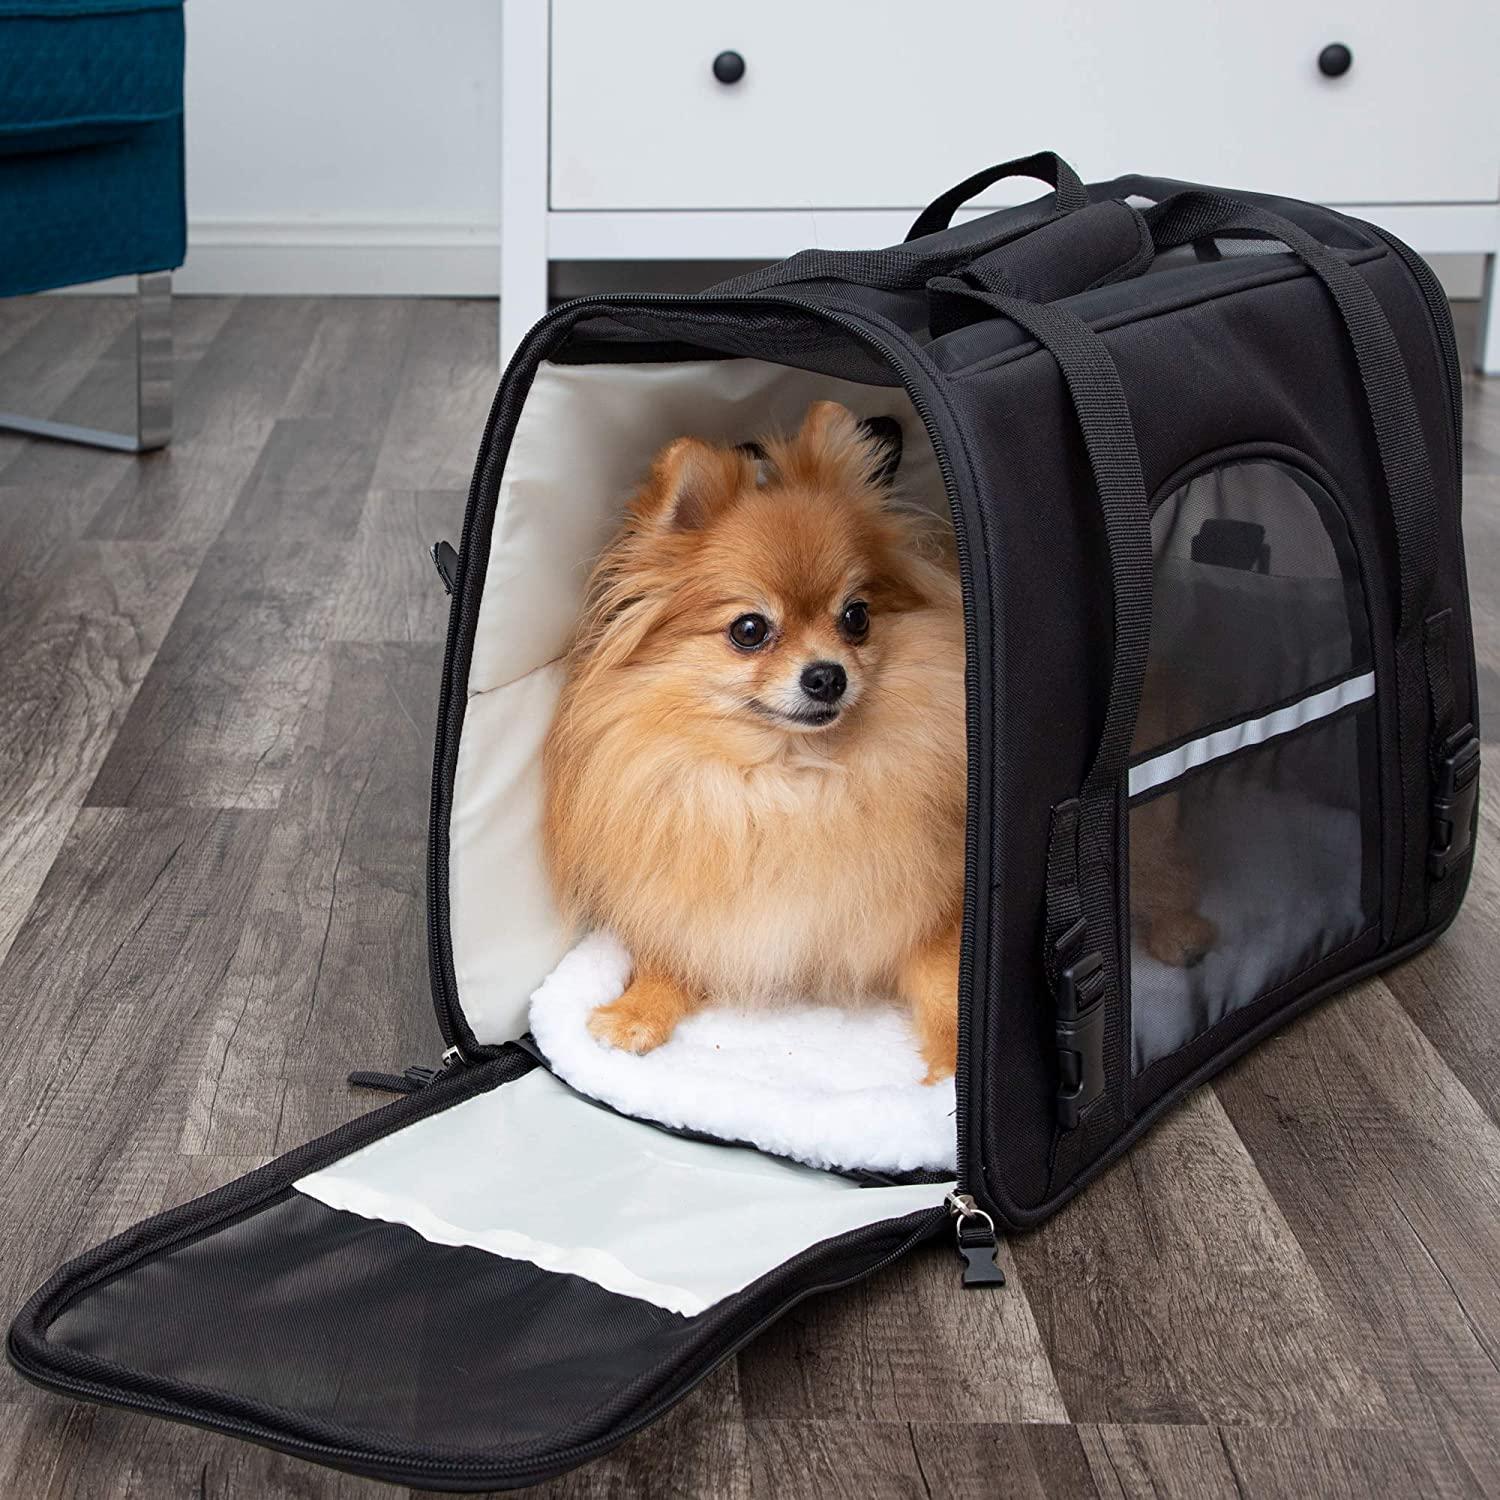 Cat Carrier, TSA Airline Approved Pet Carriers, Soft-Sided Dog Carrier